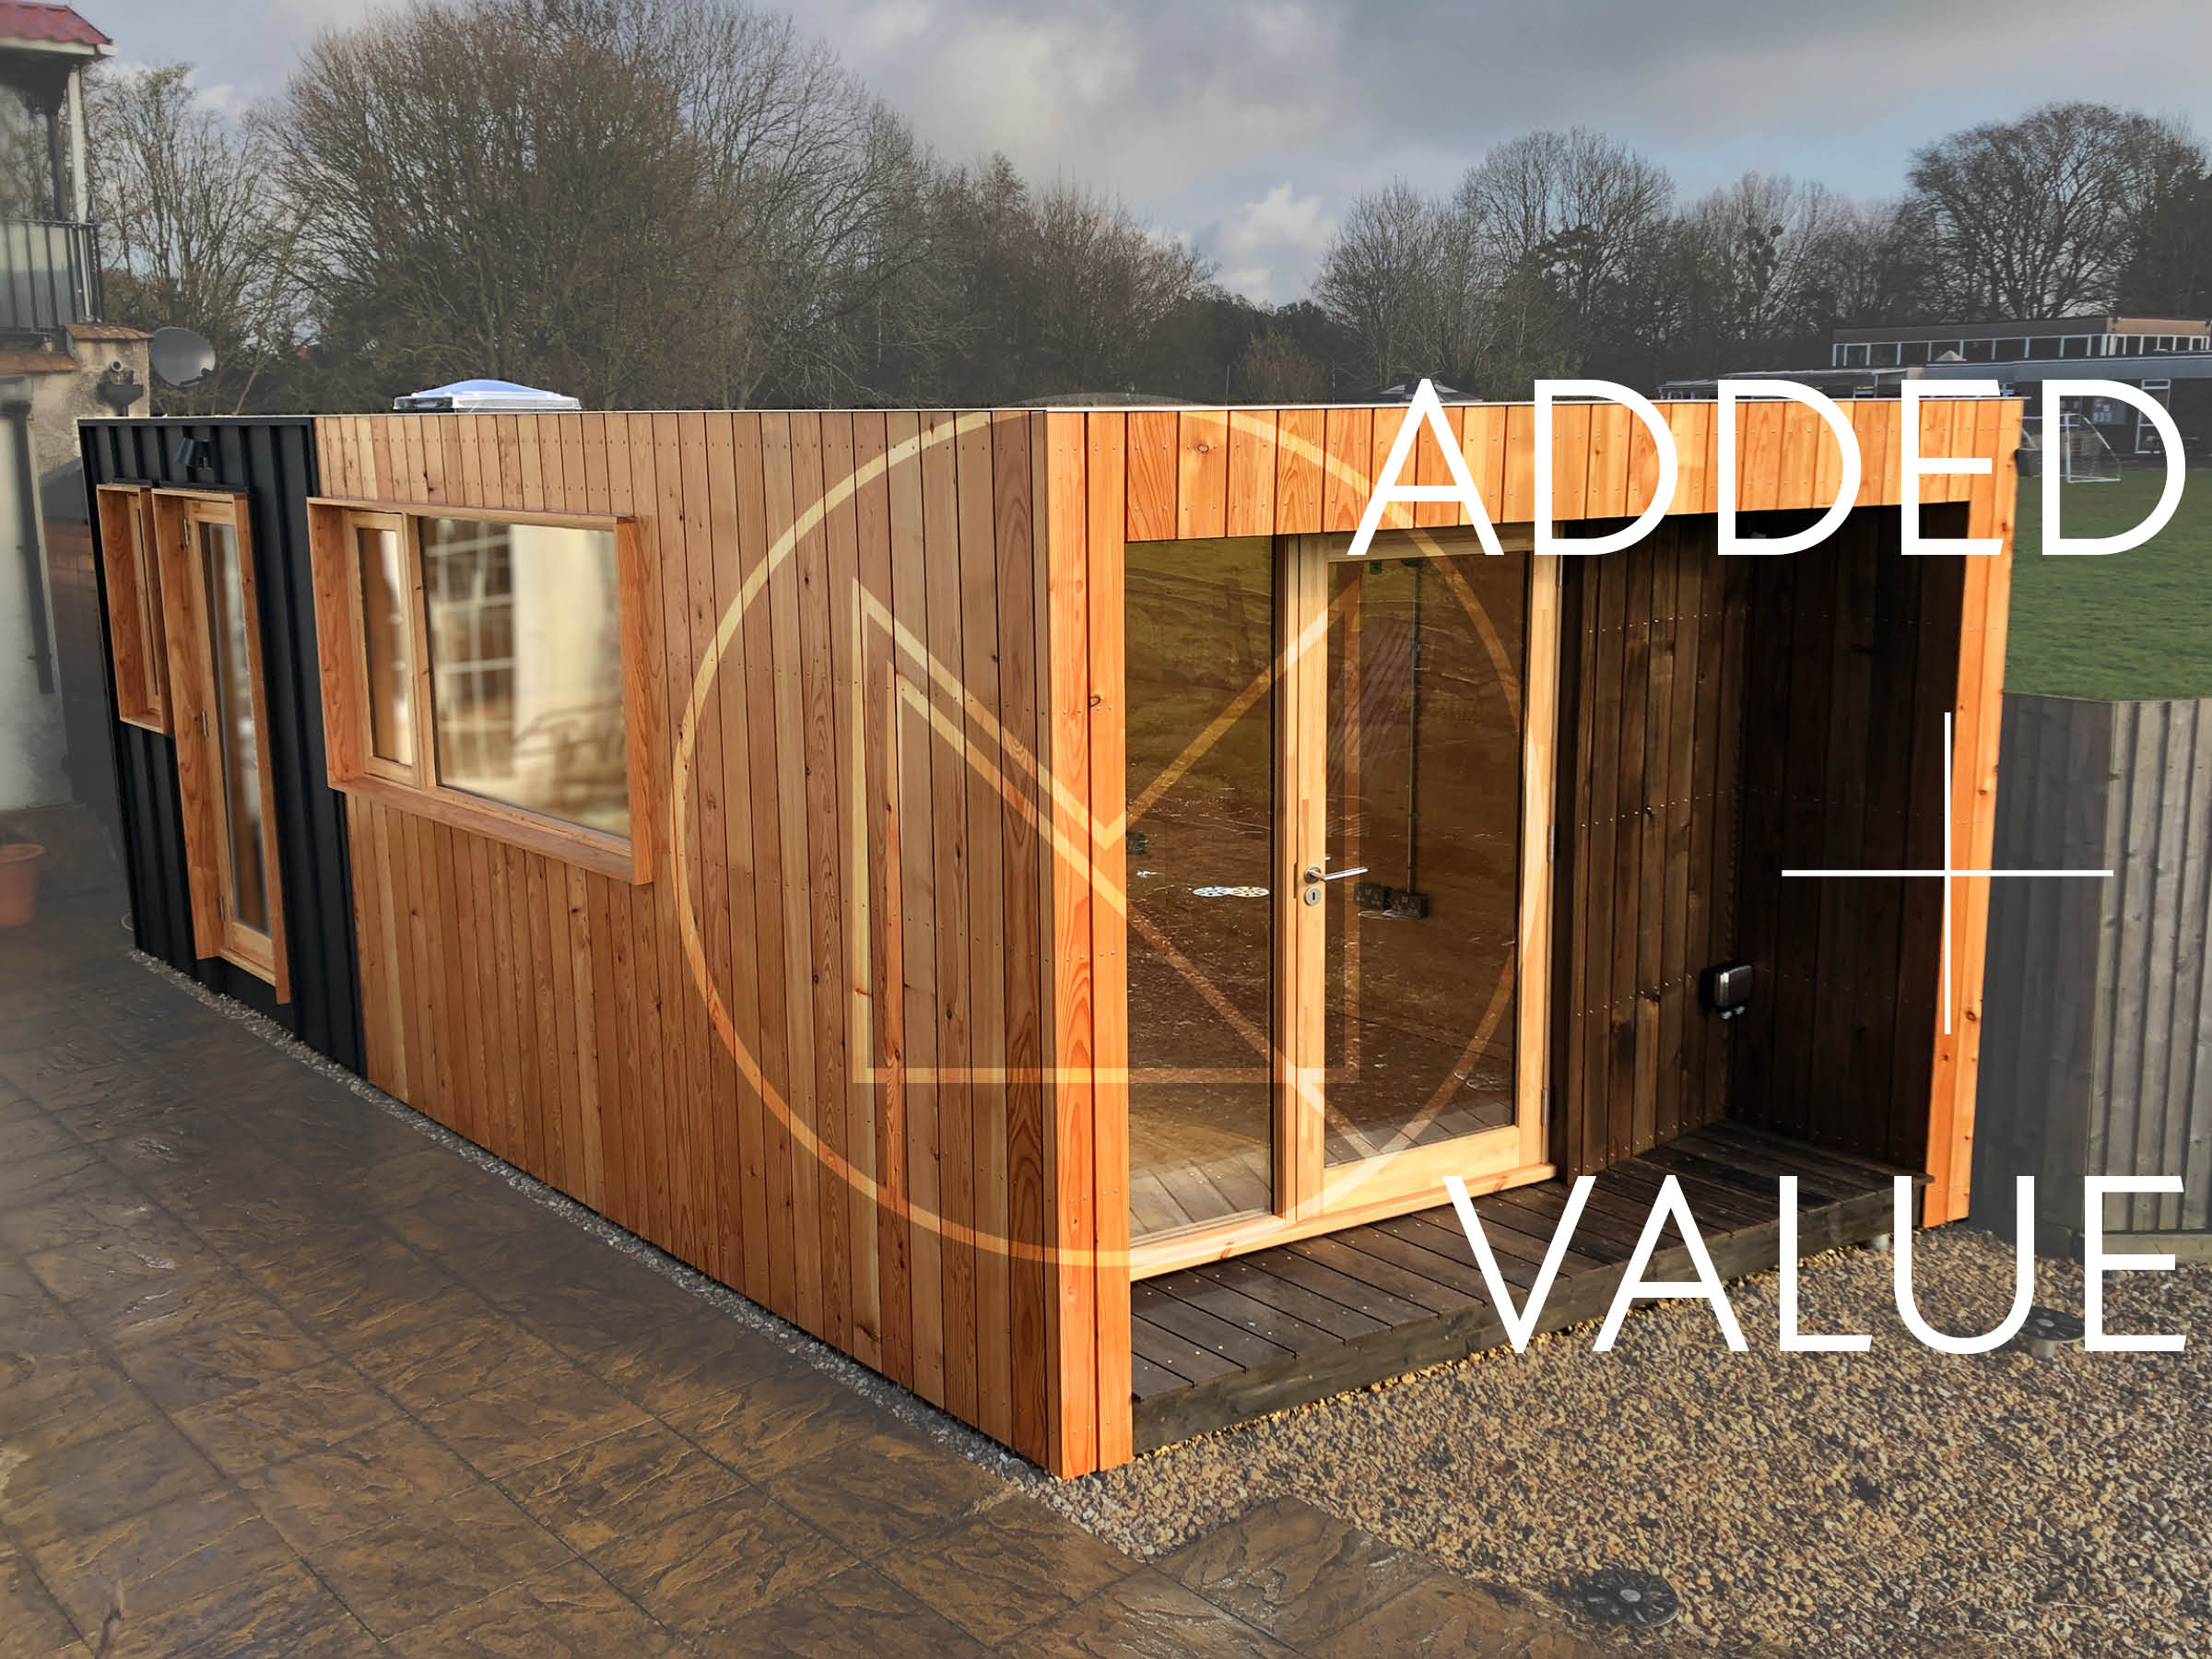 Cabins add value to your property